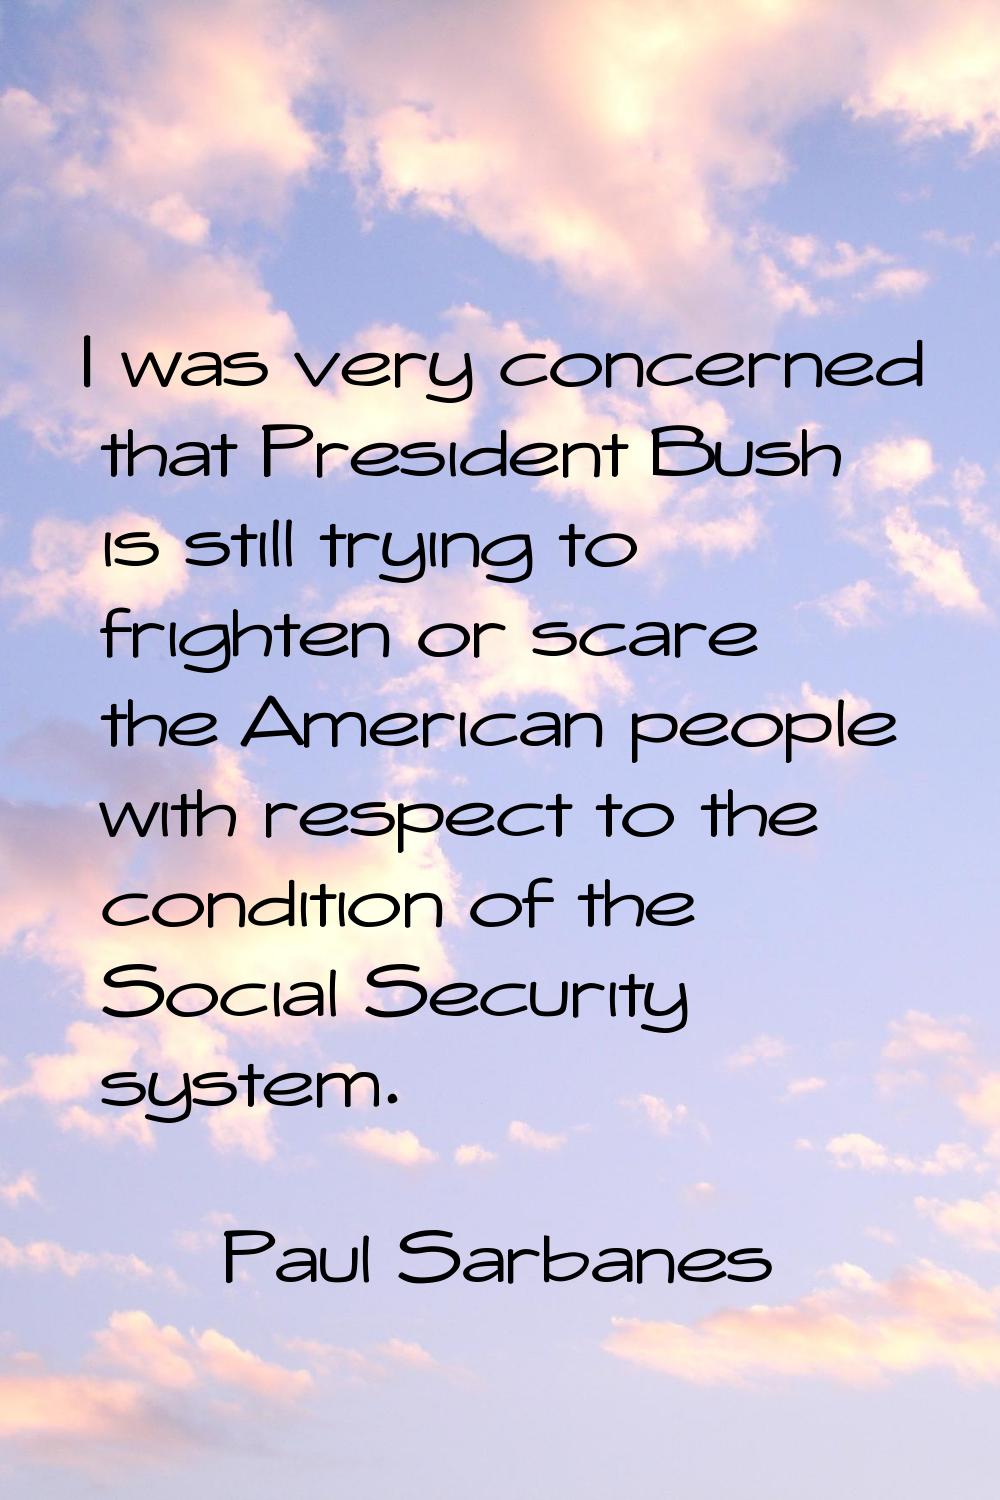 I was very concerned that President Bush is still trying to frighten or scare the American people w